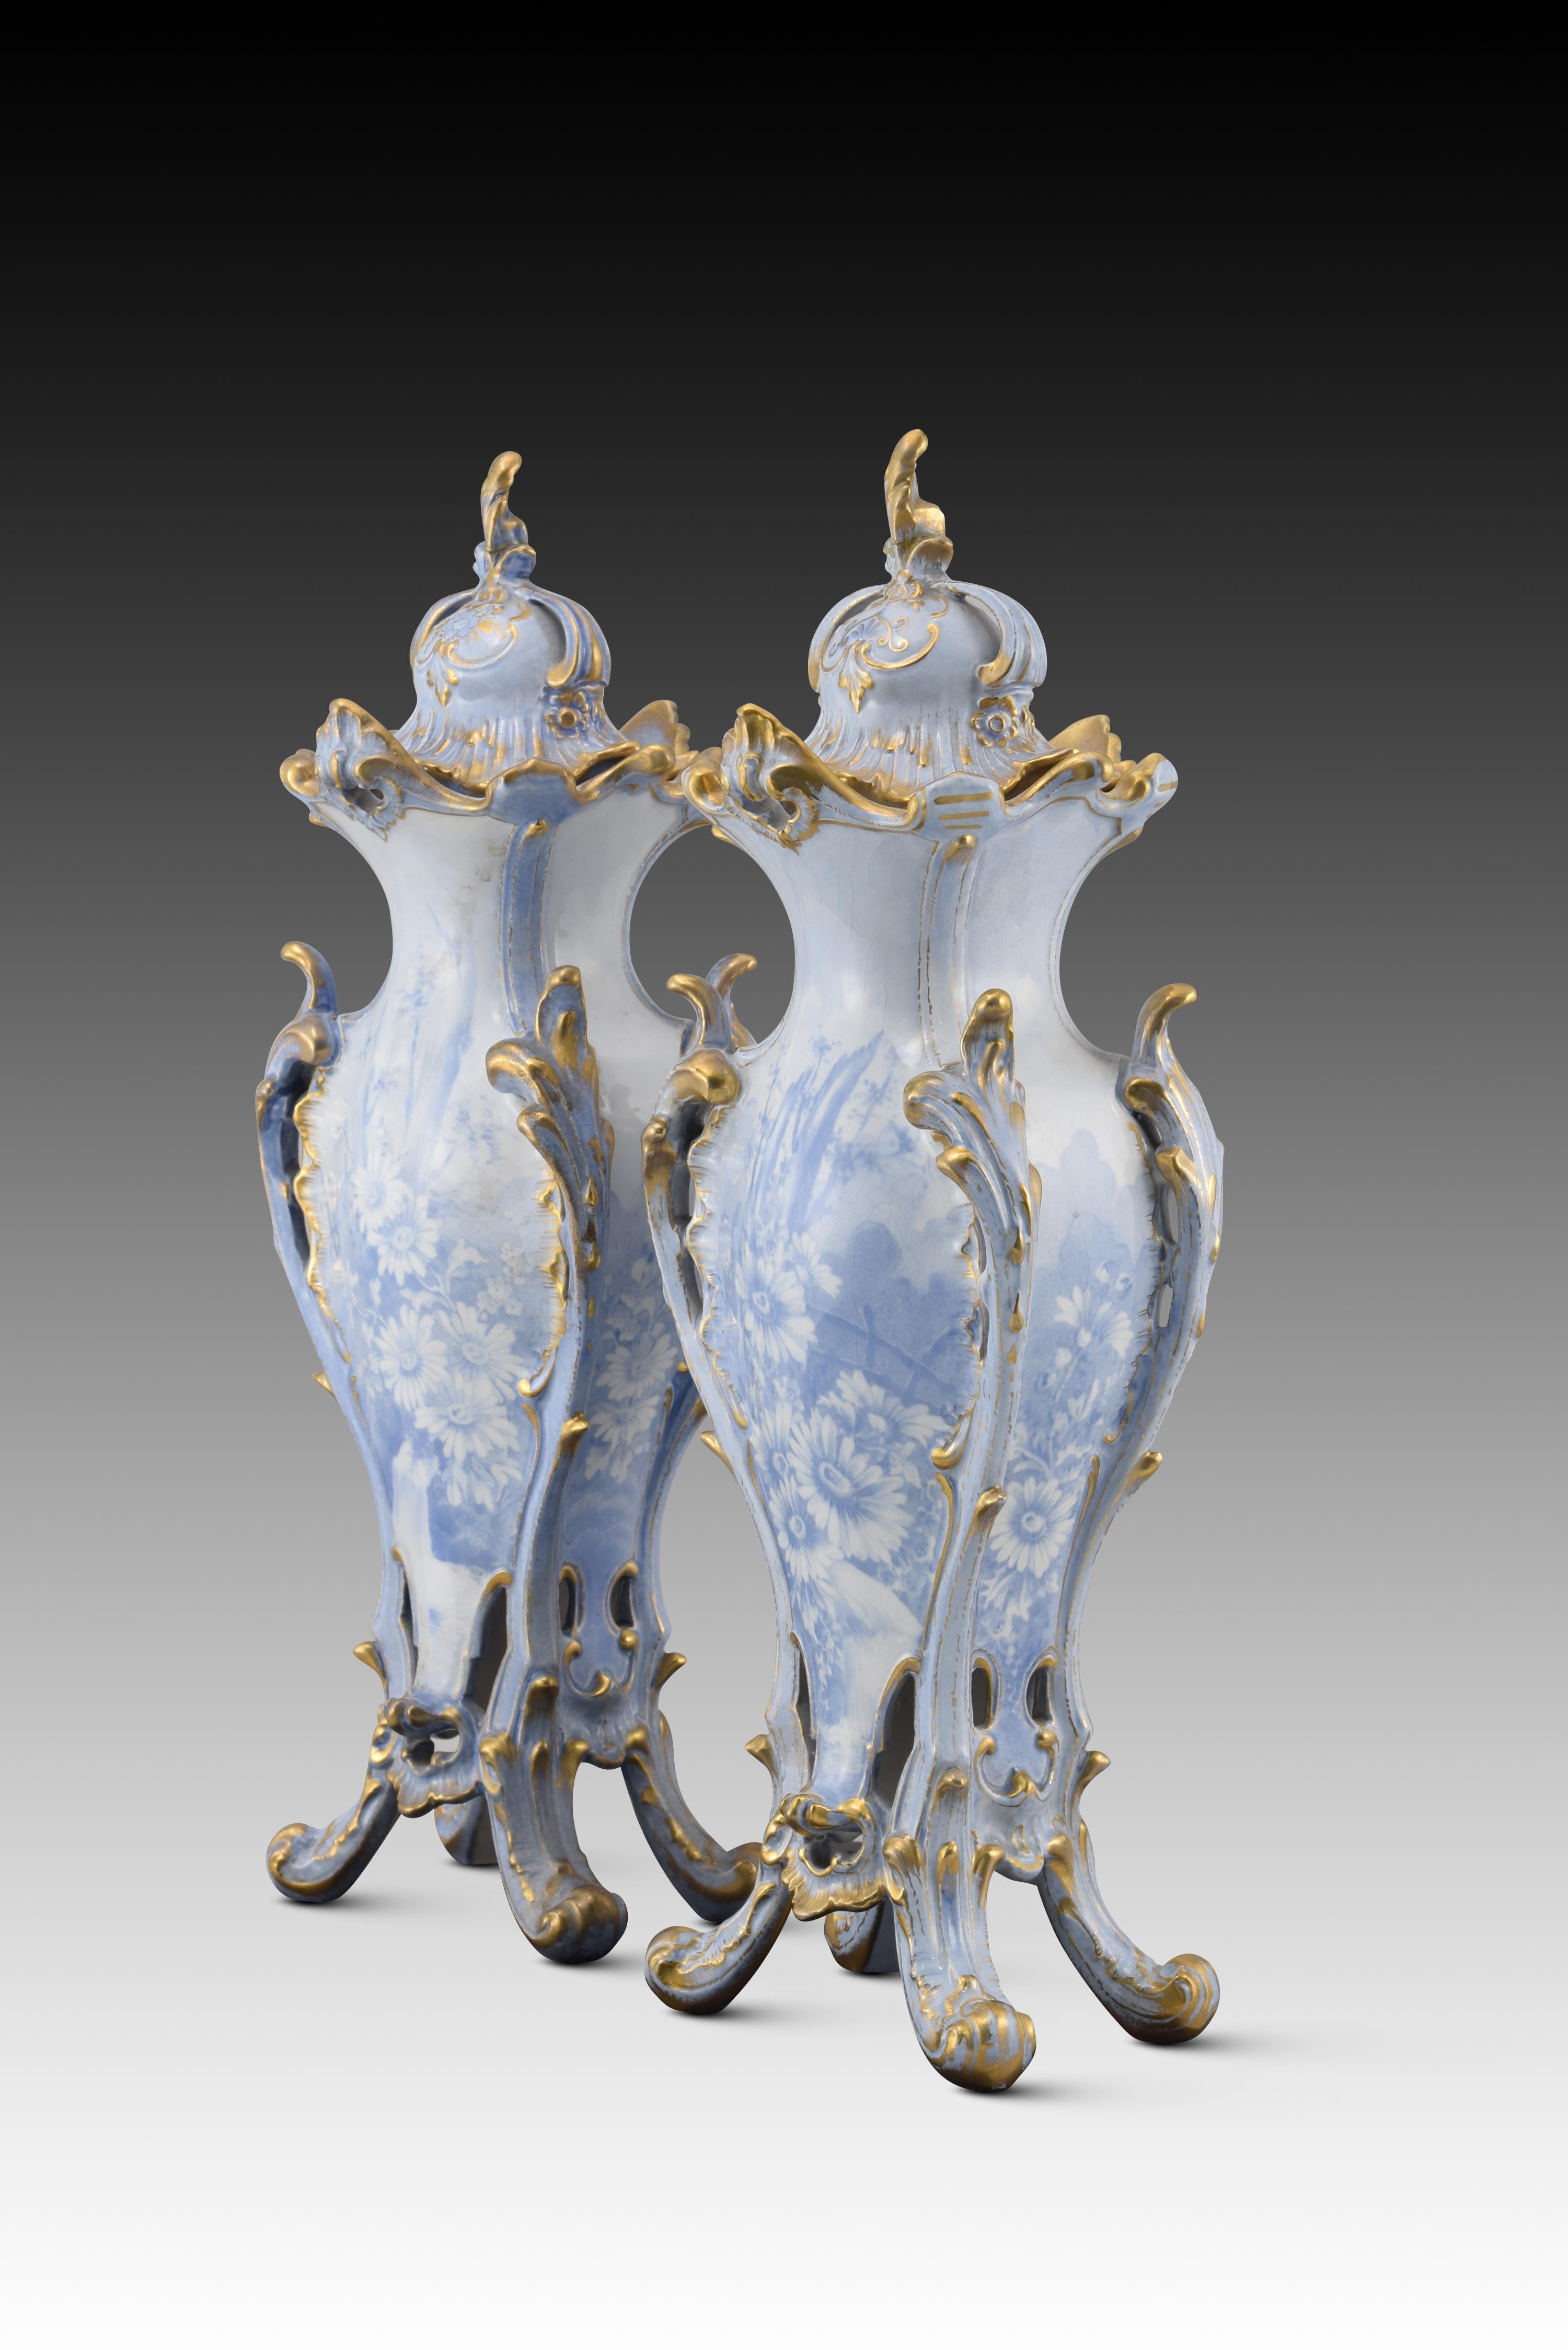 Neoclassical Revival Pair of vases with lids. Enameled porcelain. Royal Bonn, Germany, 20th century